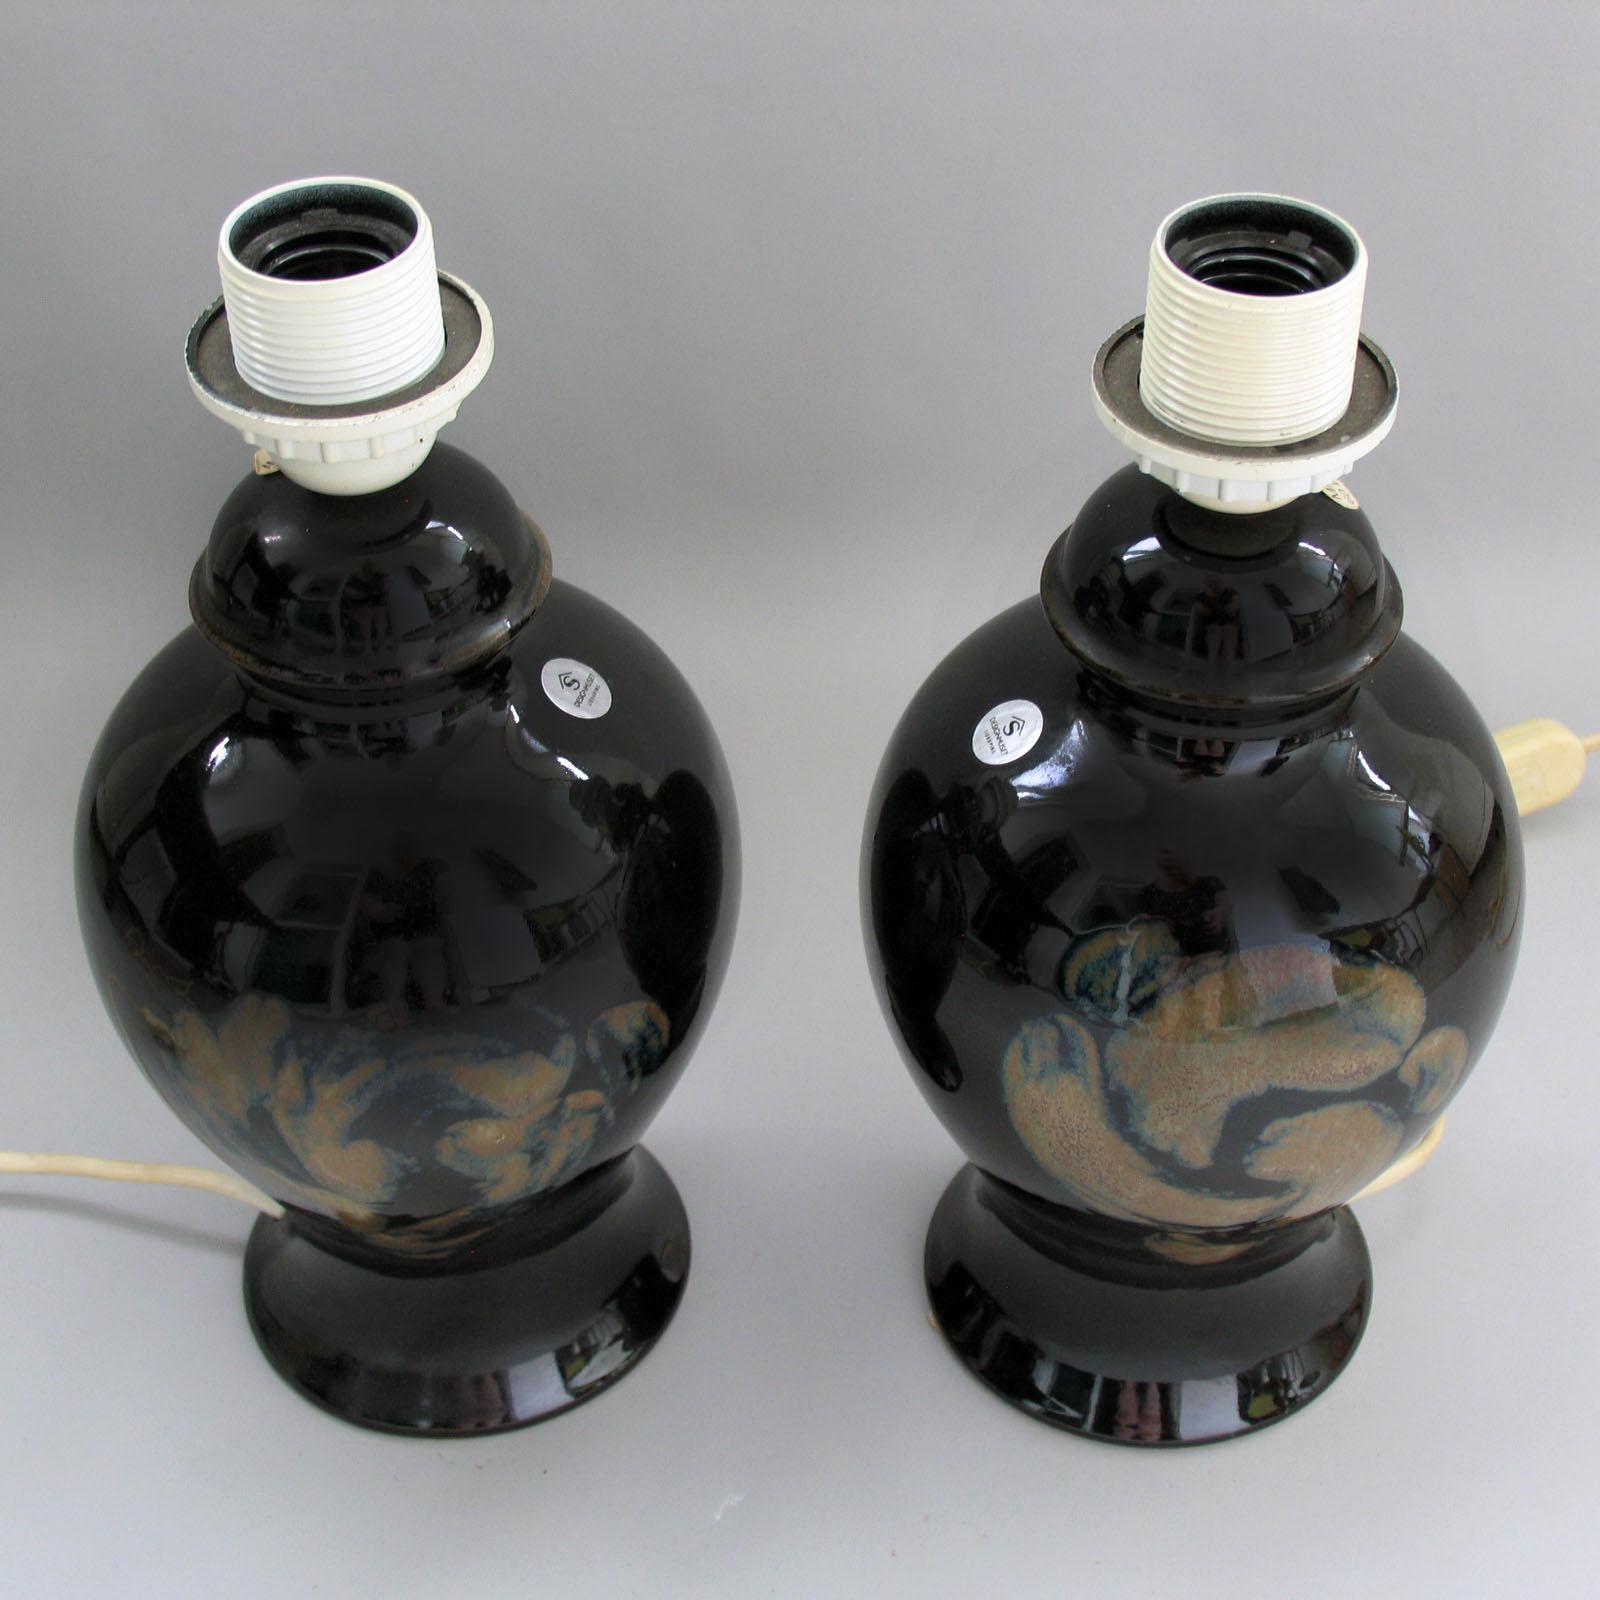 Glazed Kent Ericsson and Carl-Harry Stalhane Rare Pair of Ceramic Table Lamps For Sale